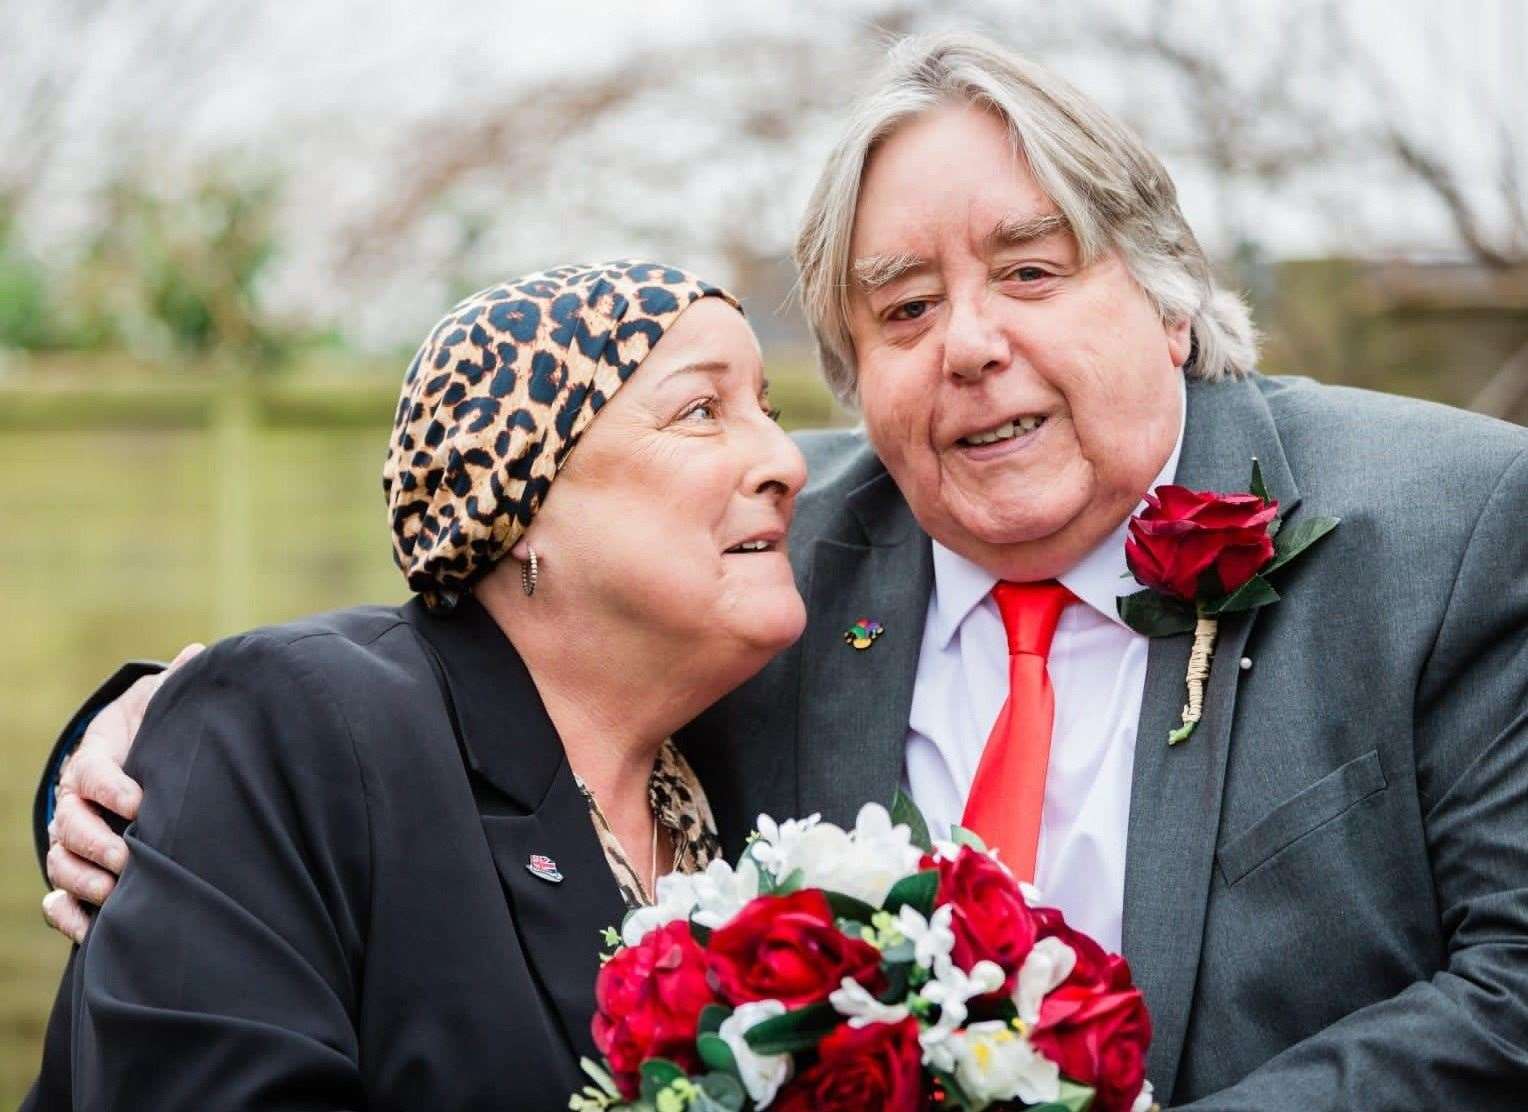 Julie, 62, was diagnosed with a glioblastoma and is undergoing chemotherapy. Picture: SWNS